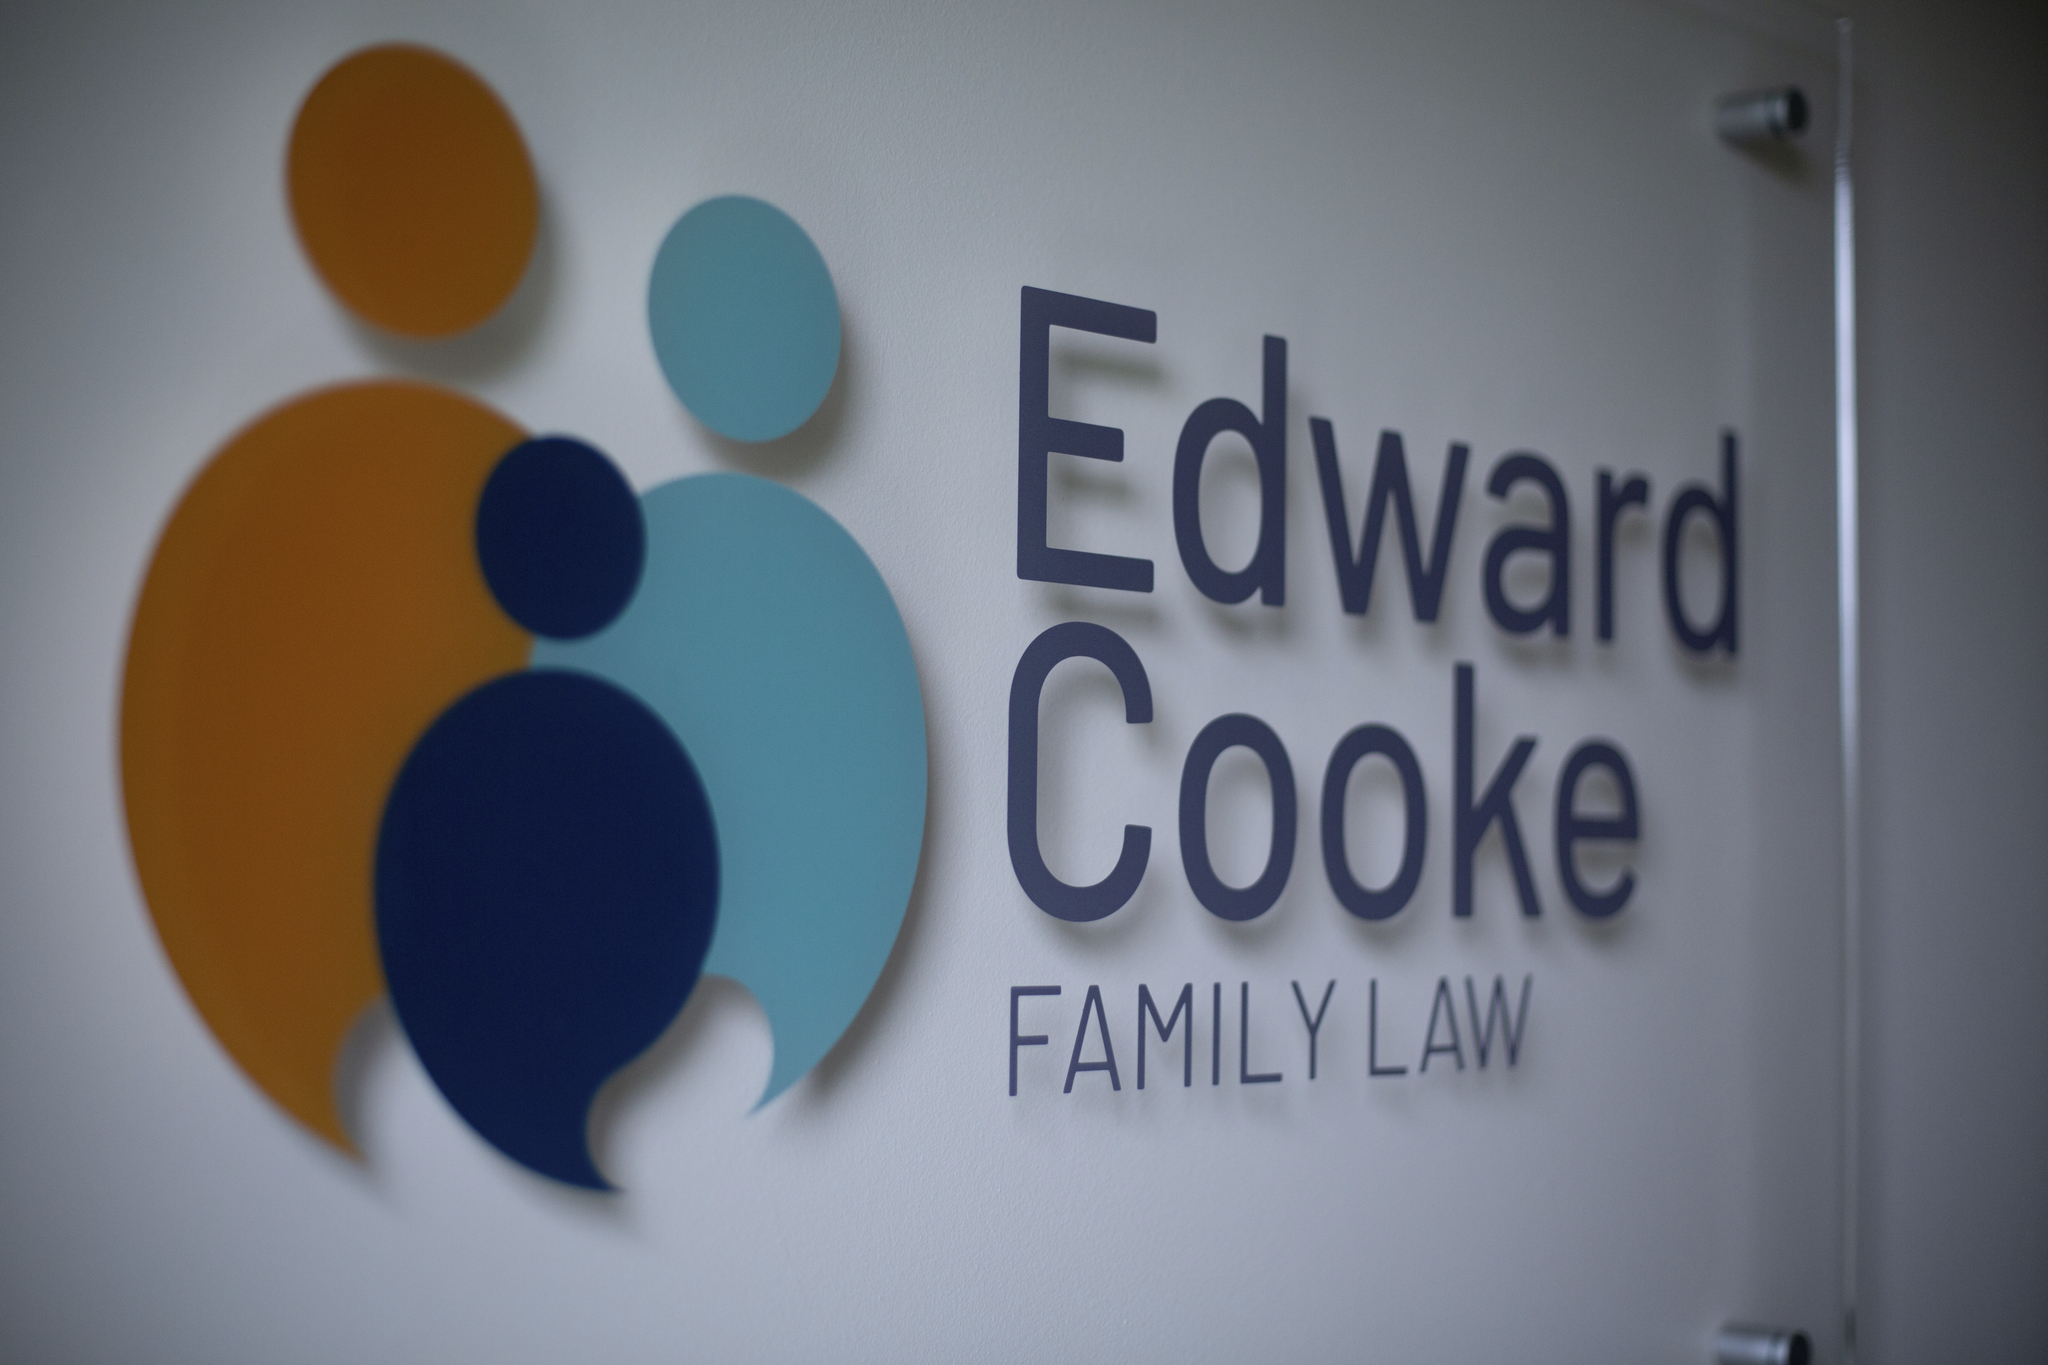 Edward Cooke Family Law Chilgrove (Chichester) Office Sign